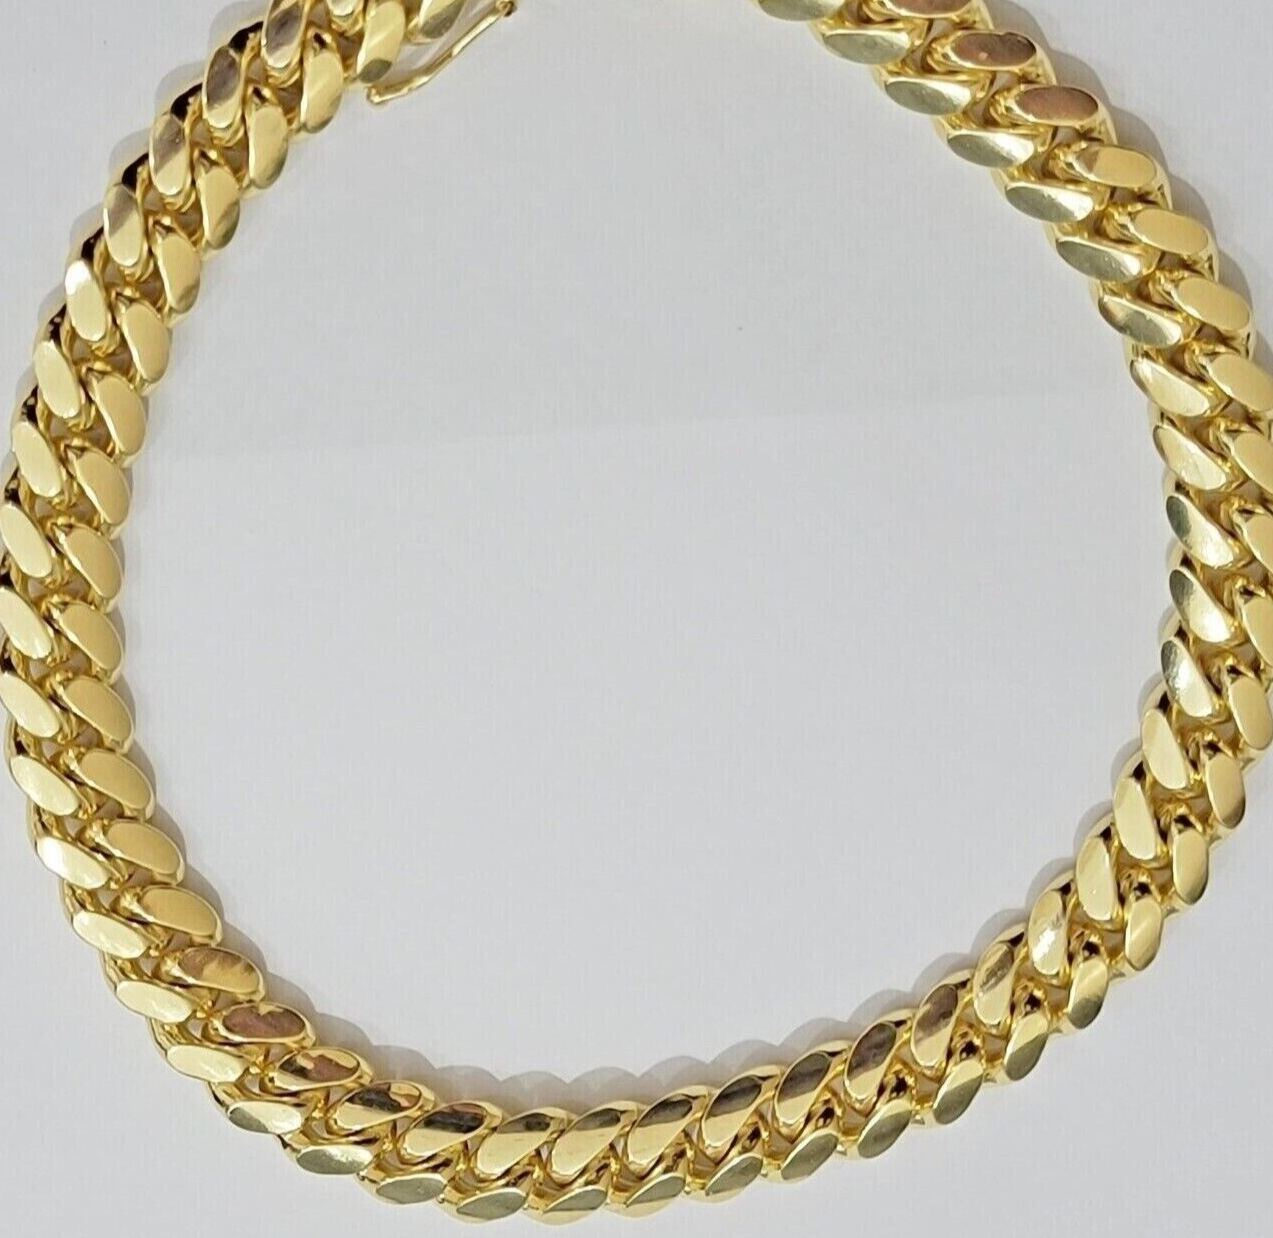 Real 14k Yellow Gold Chain Miami Cuban Link Necklace Mens Solid 8mm 22 Inch 14KT